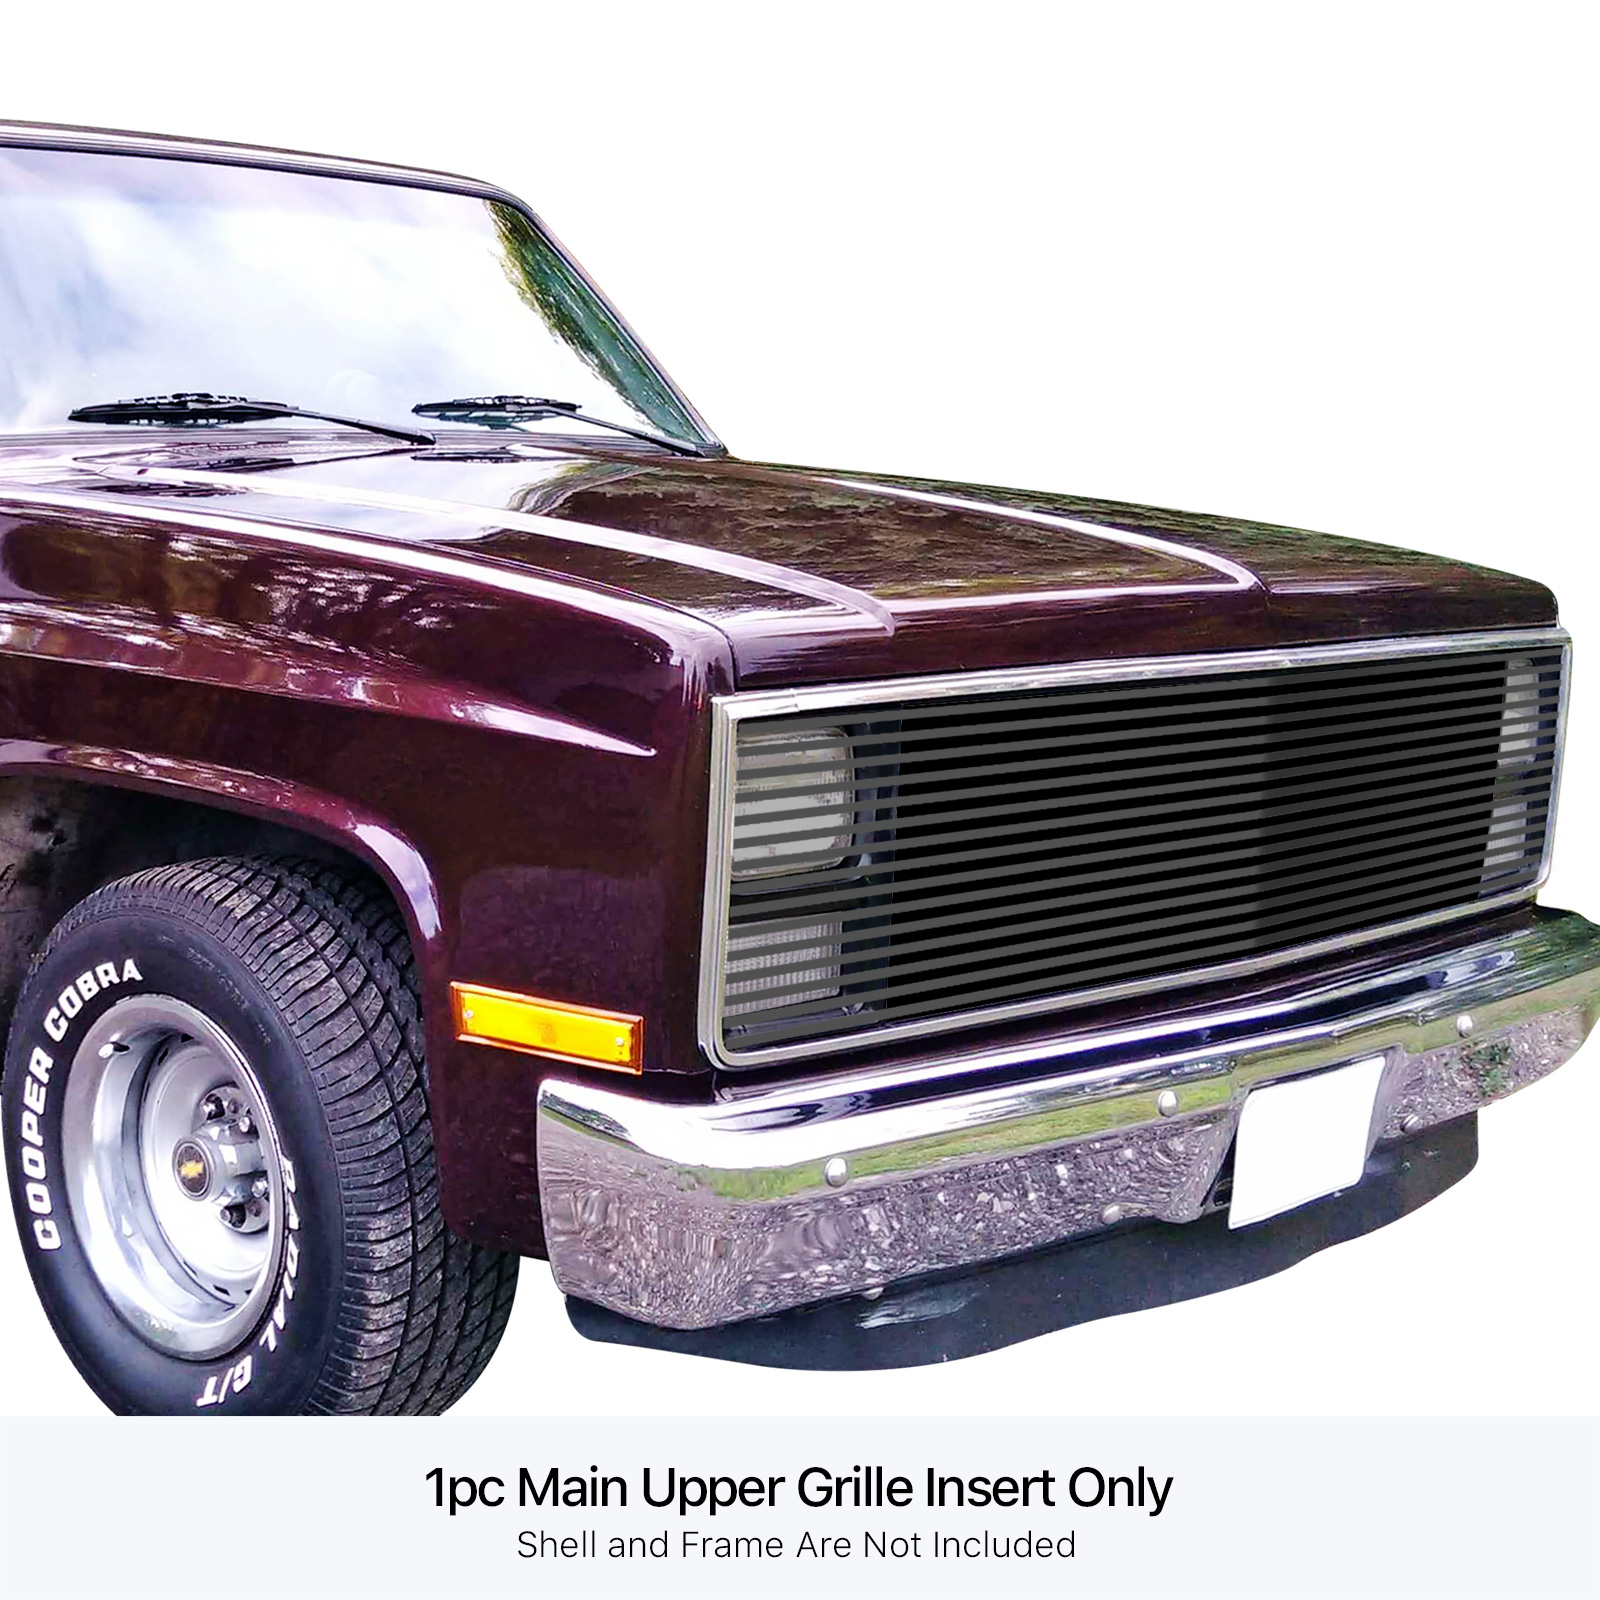 1981-1988 Chevy Blazer  (Phantom Style With Stacked Lights)/1981-1987 Chevy C/K Pickup (Phantom Style With Stacked Lights)/1981-1988 Chevy Suburban (Phantom Style With Stacked Lights)/1981-1987 GMC C/K Pickup (Phantom Style With Stacked Lights)/1981-1988